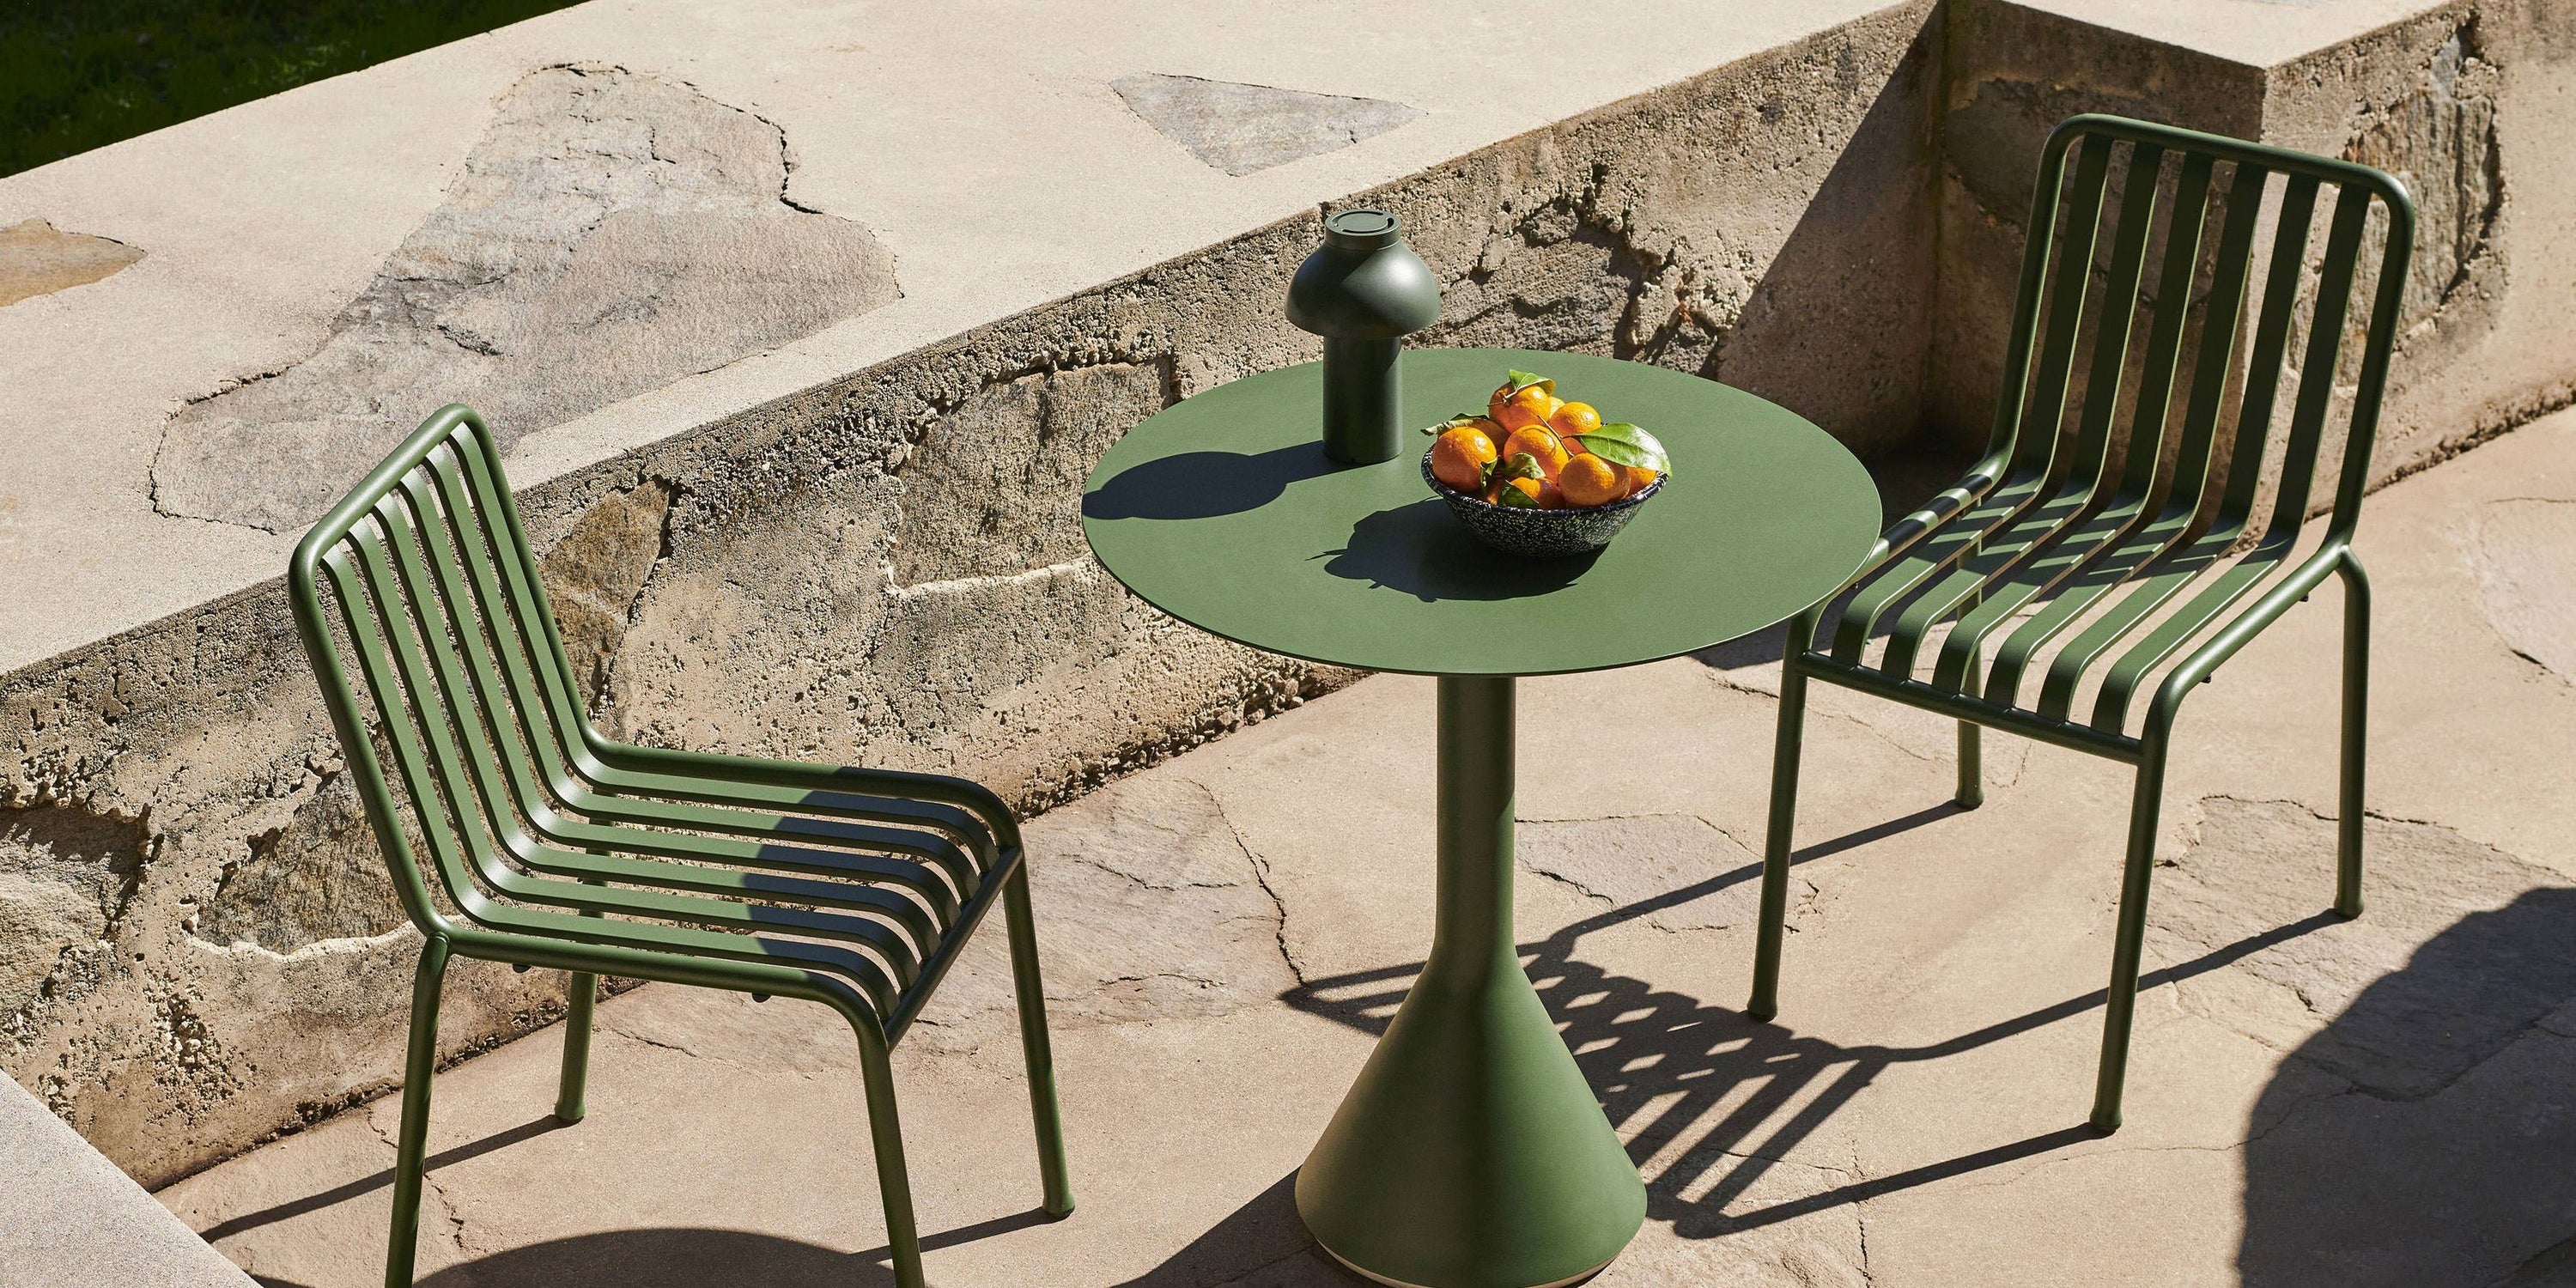 Outdoor green metal chairs with bowl of oranges on table